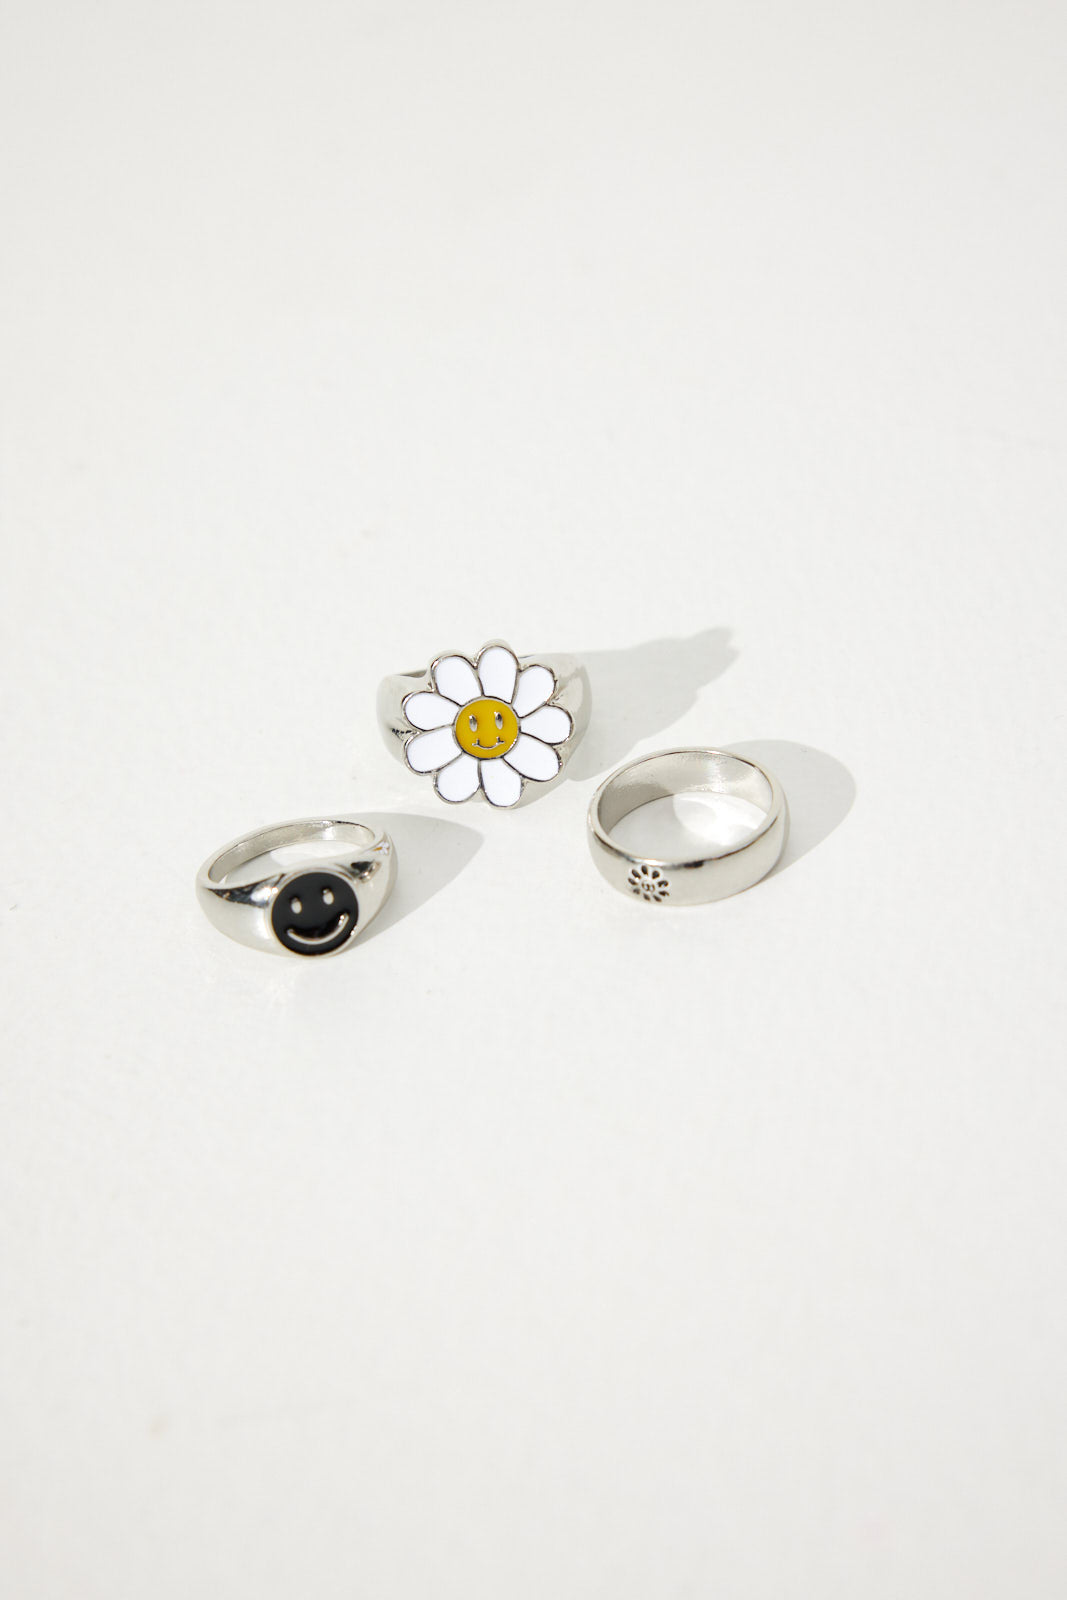 NTH Daisy Ring Set Silver - FINAL SALE